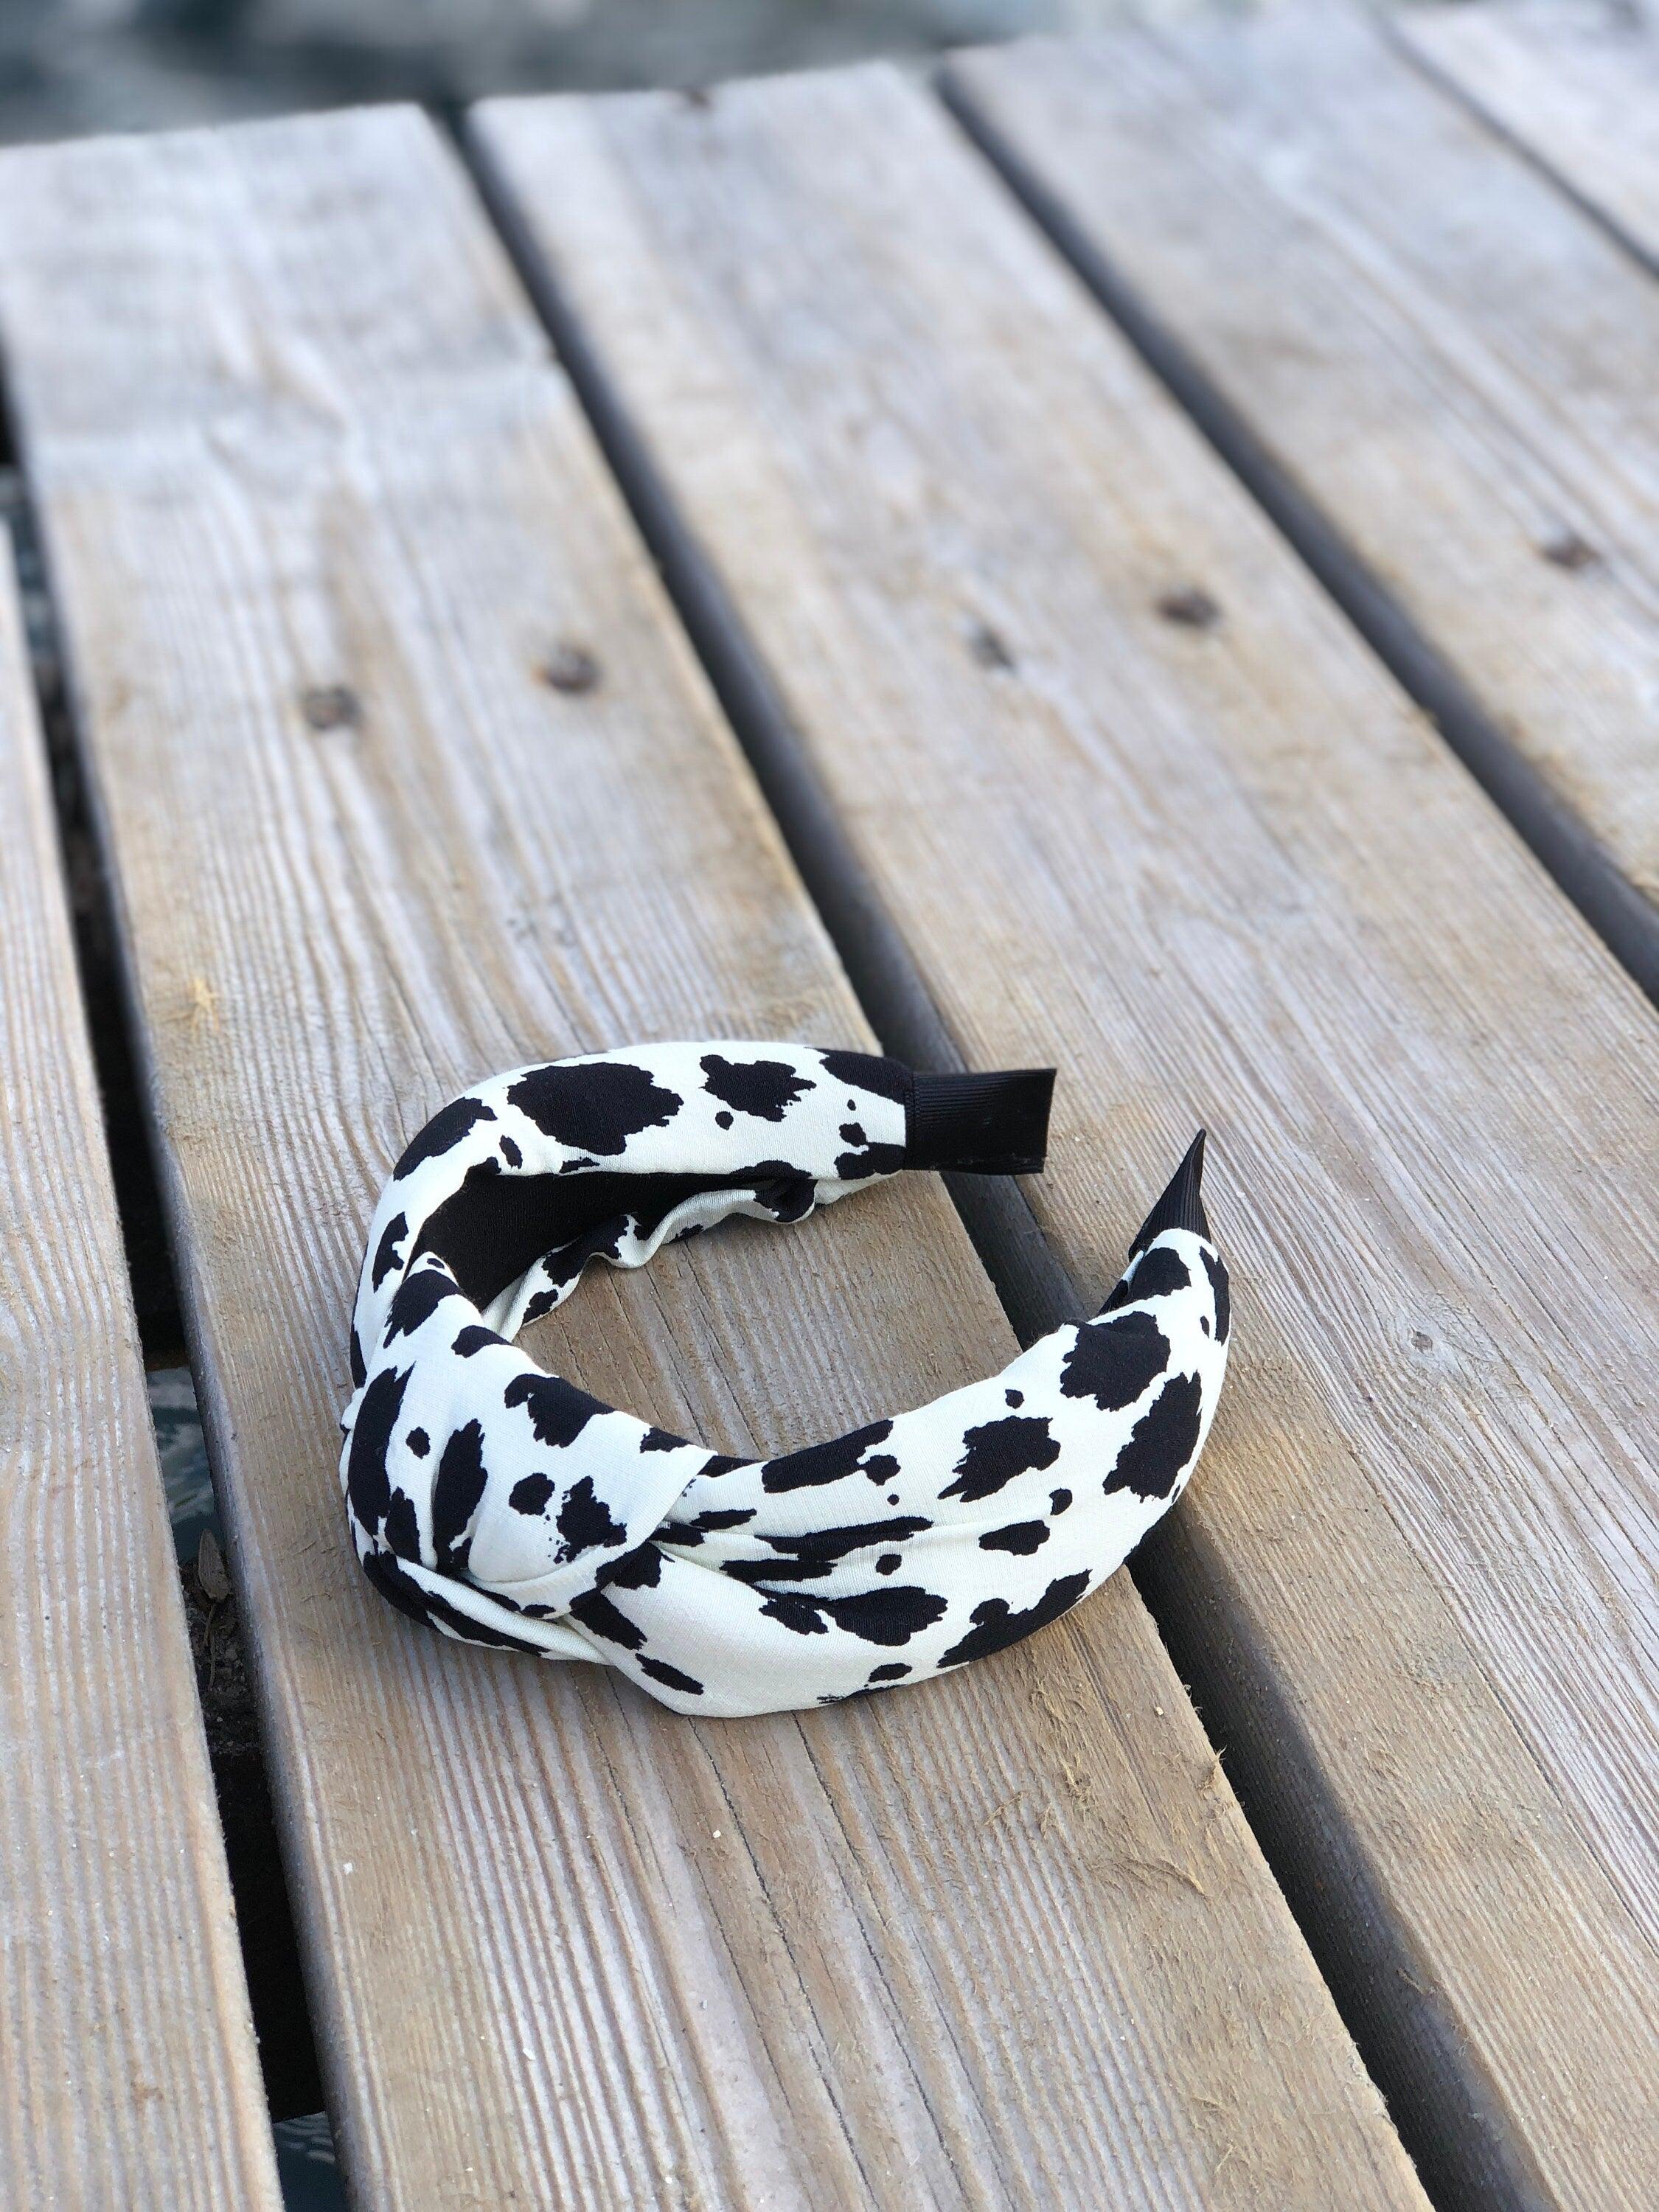 Charming White Leopard Headband - Stylish African-Inspired Spotted Cotton Headband with Wide Design and Black Bow Accent available at Moyoni Design